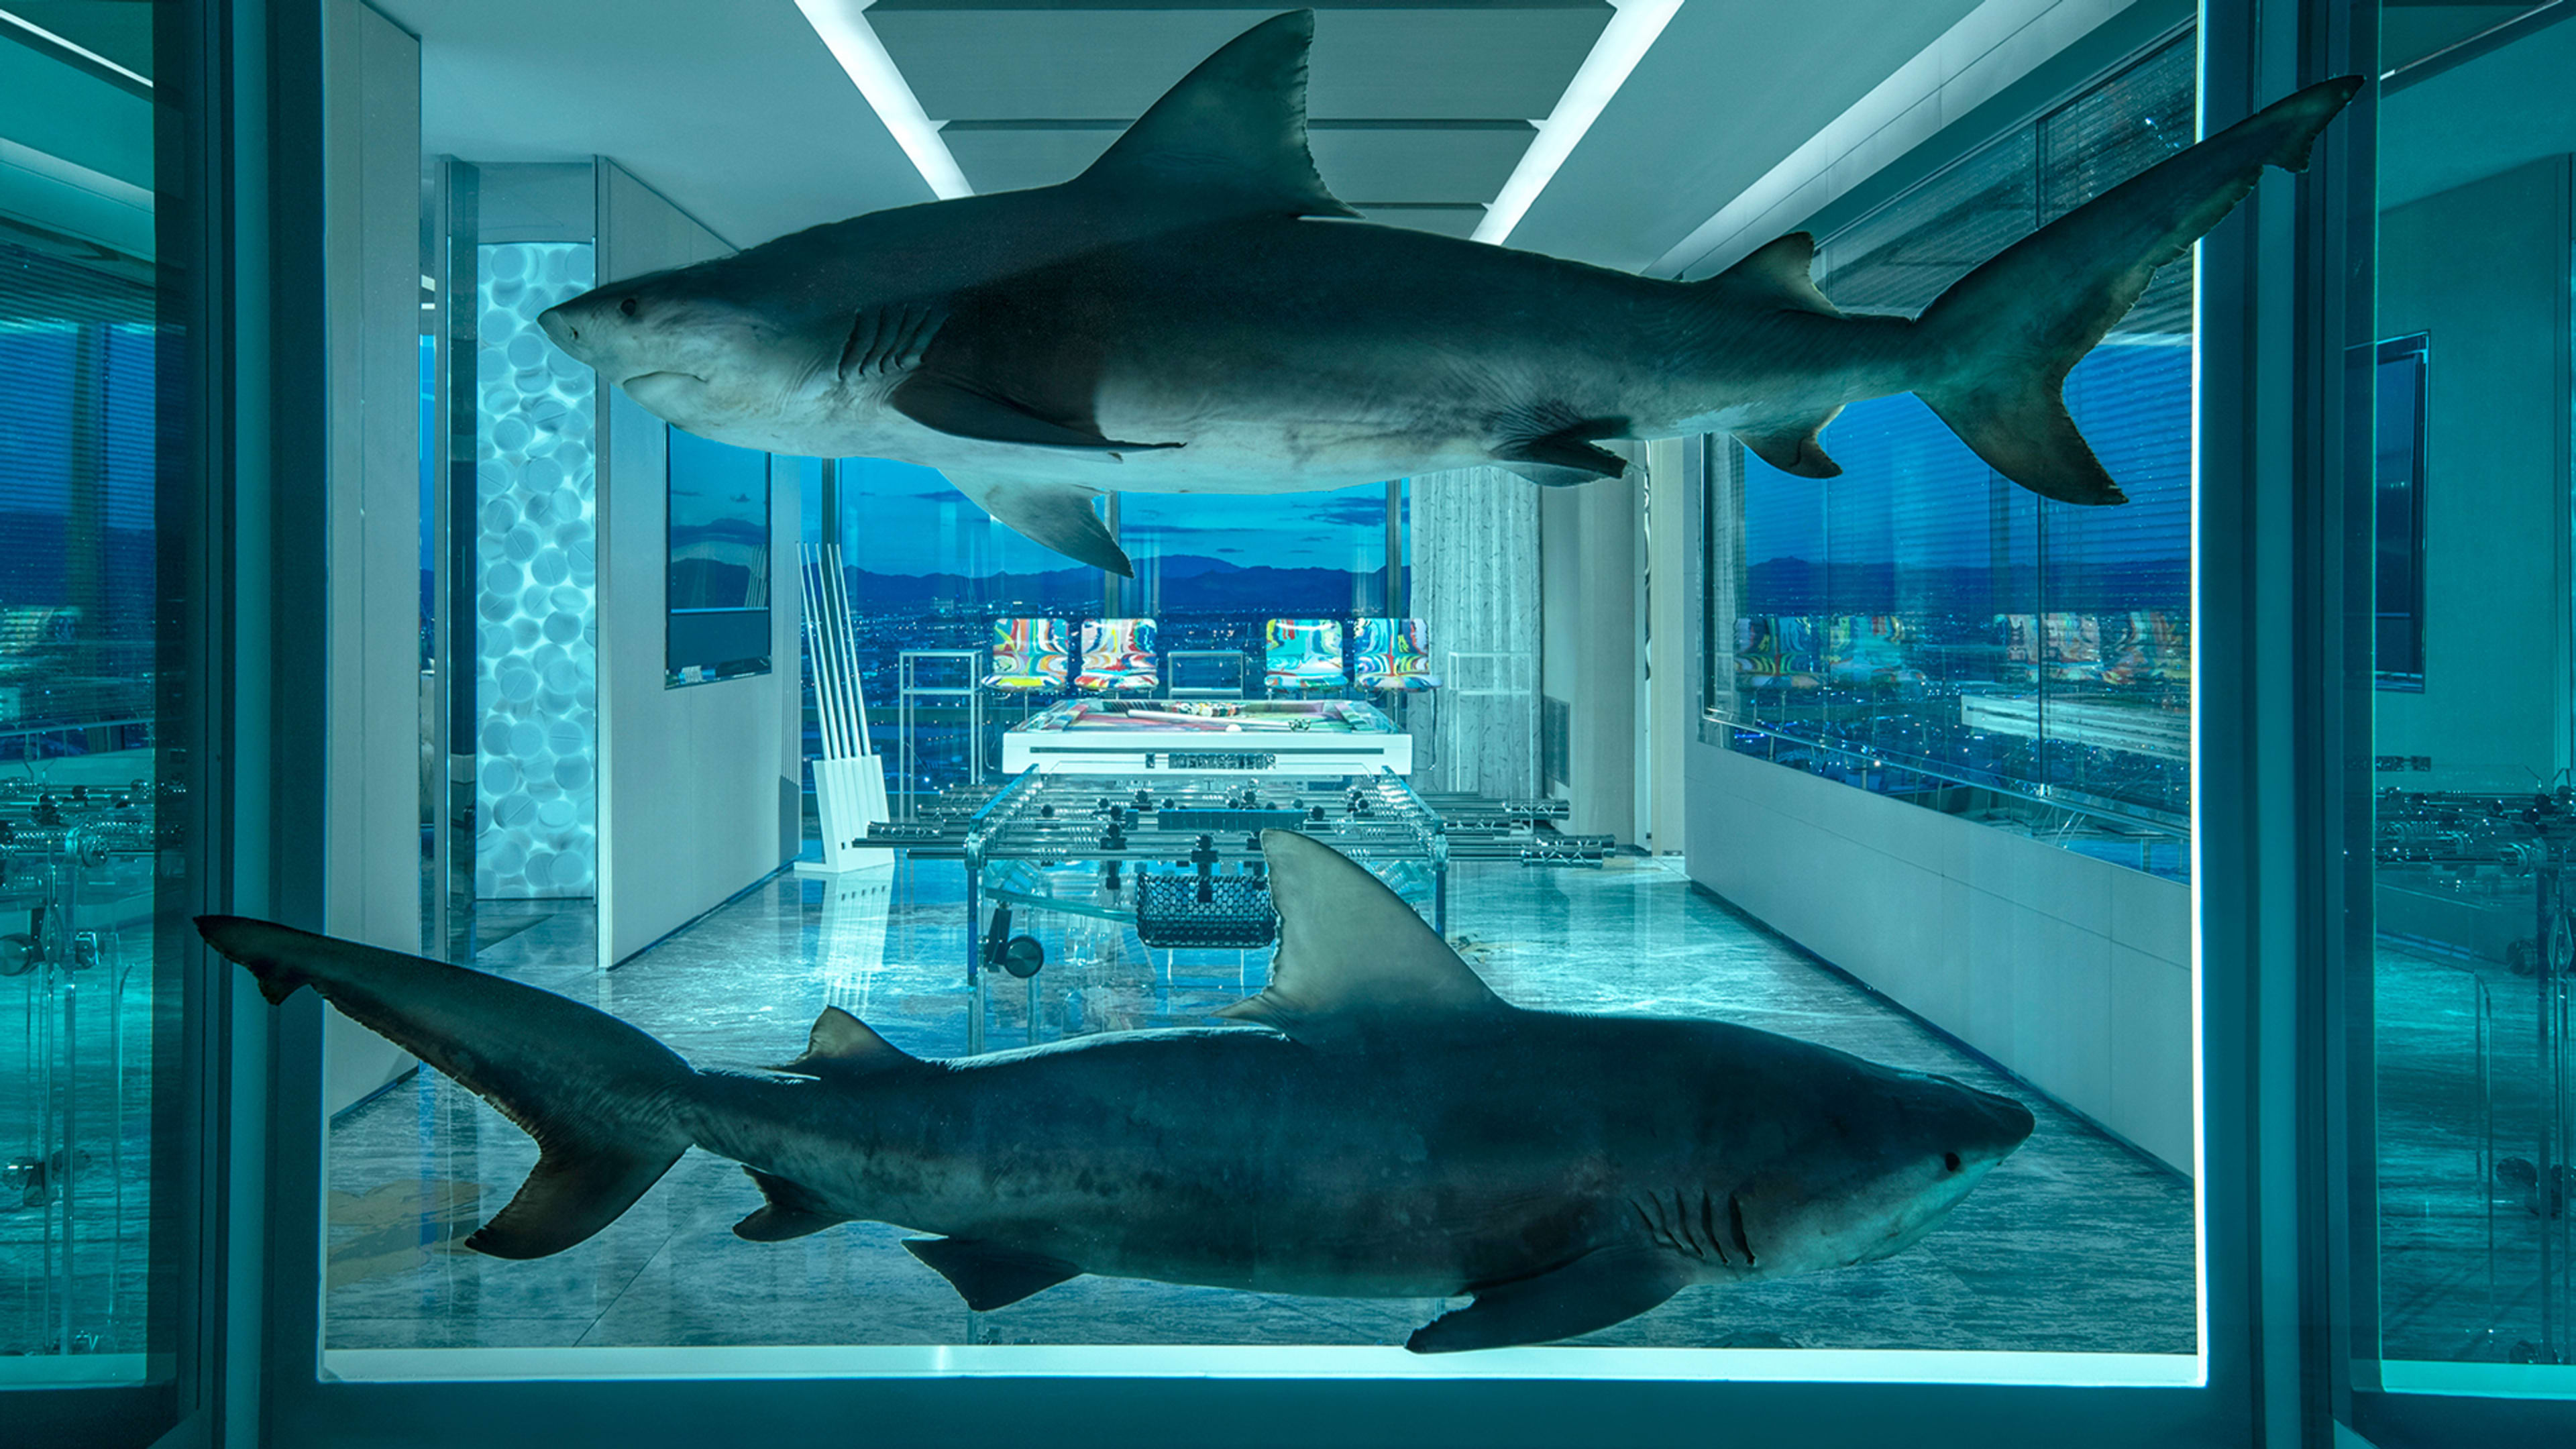 Damien Hirst designed a $100K-a-night hotel room. It’s . . . Hirsty